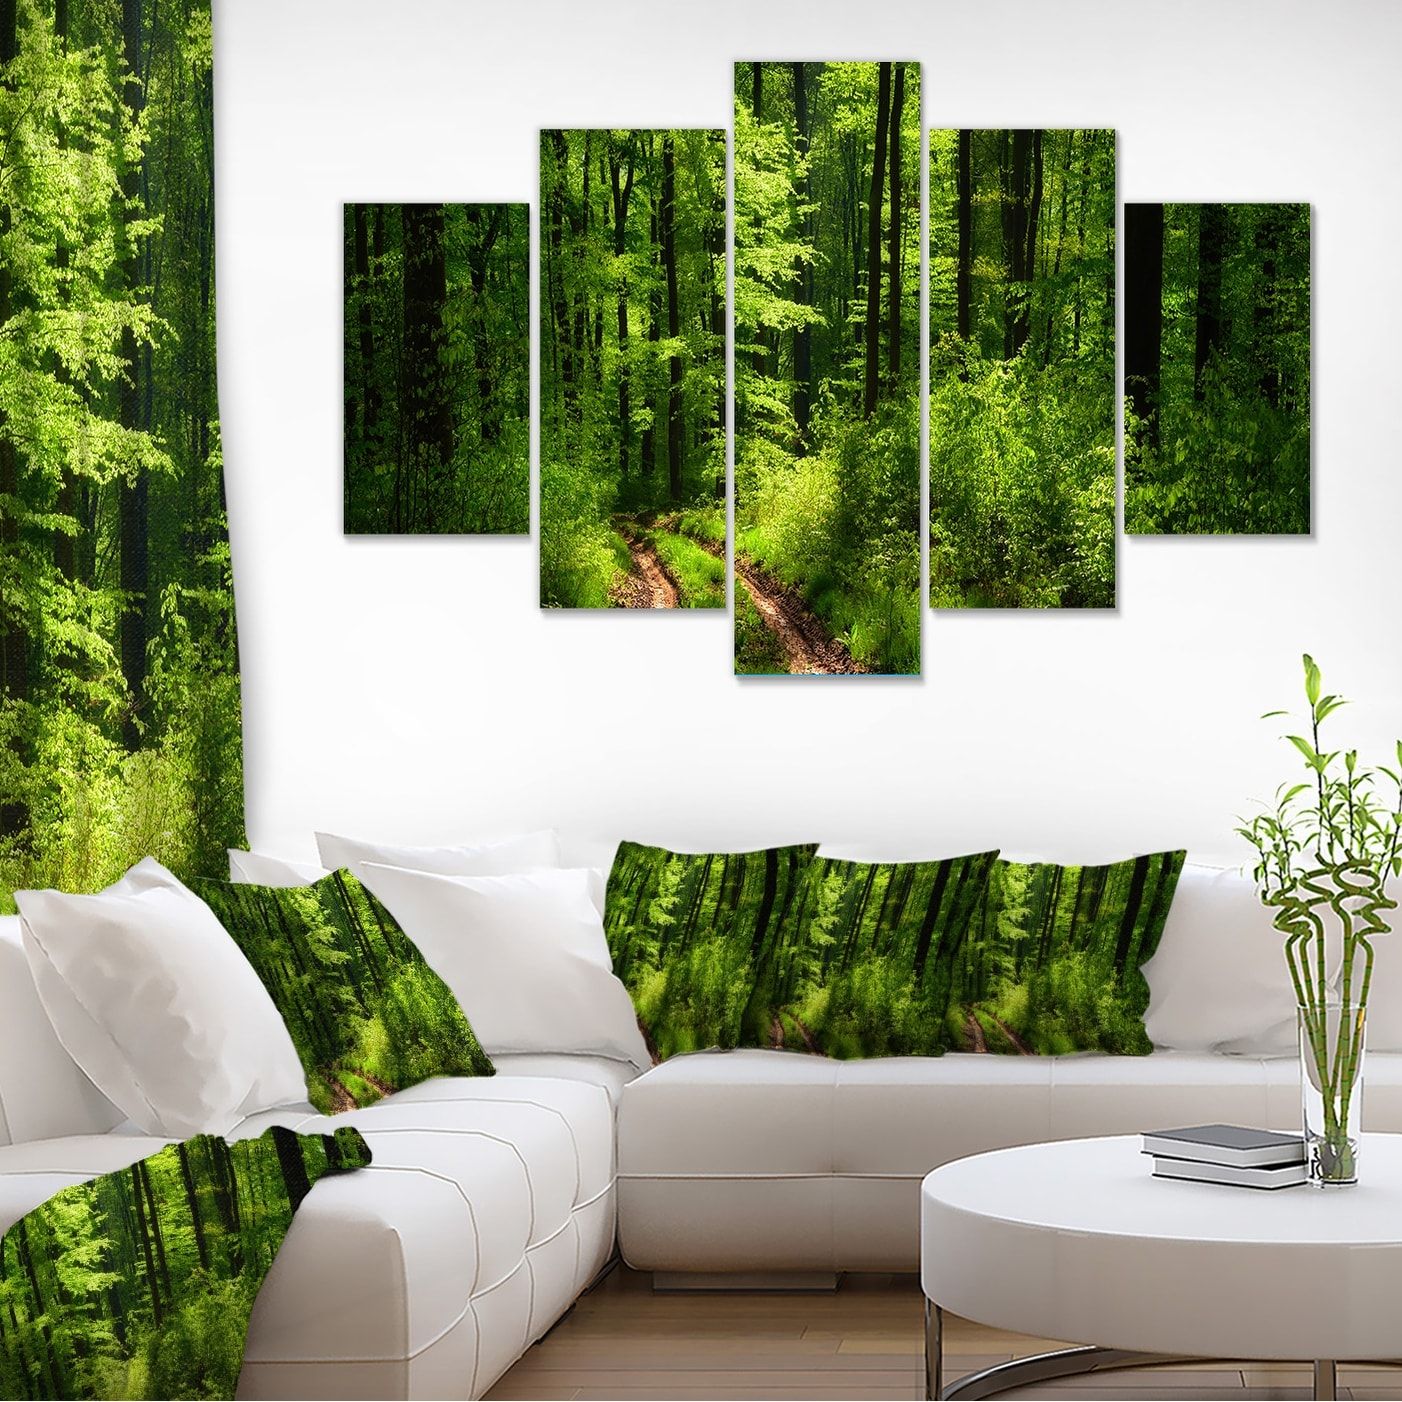 Fascinating Greenery In Wild Forest – Large Forest Wall Art Canvas – On  Sale – Overstock – 12302530 Pertaining To Forest Wall Art (View 14 of 15)